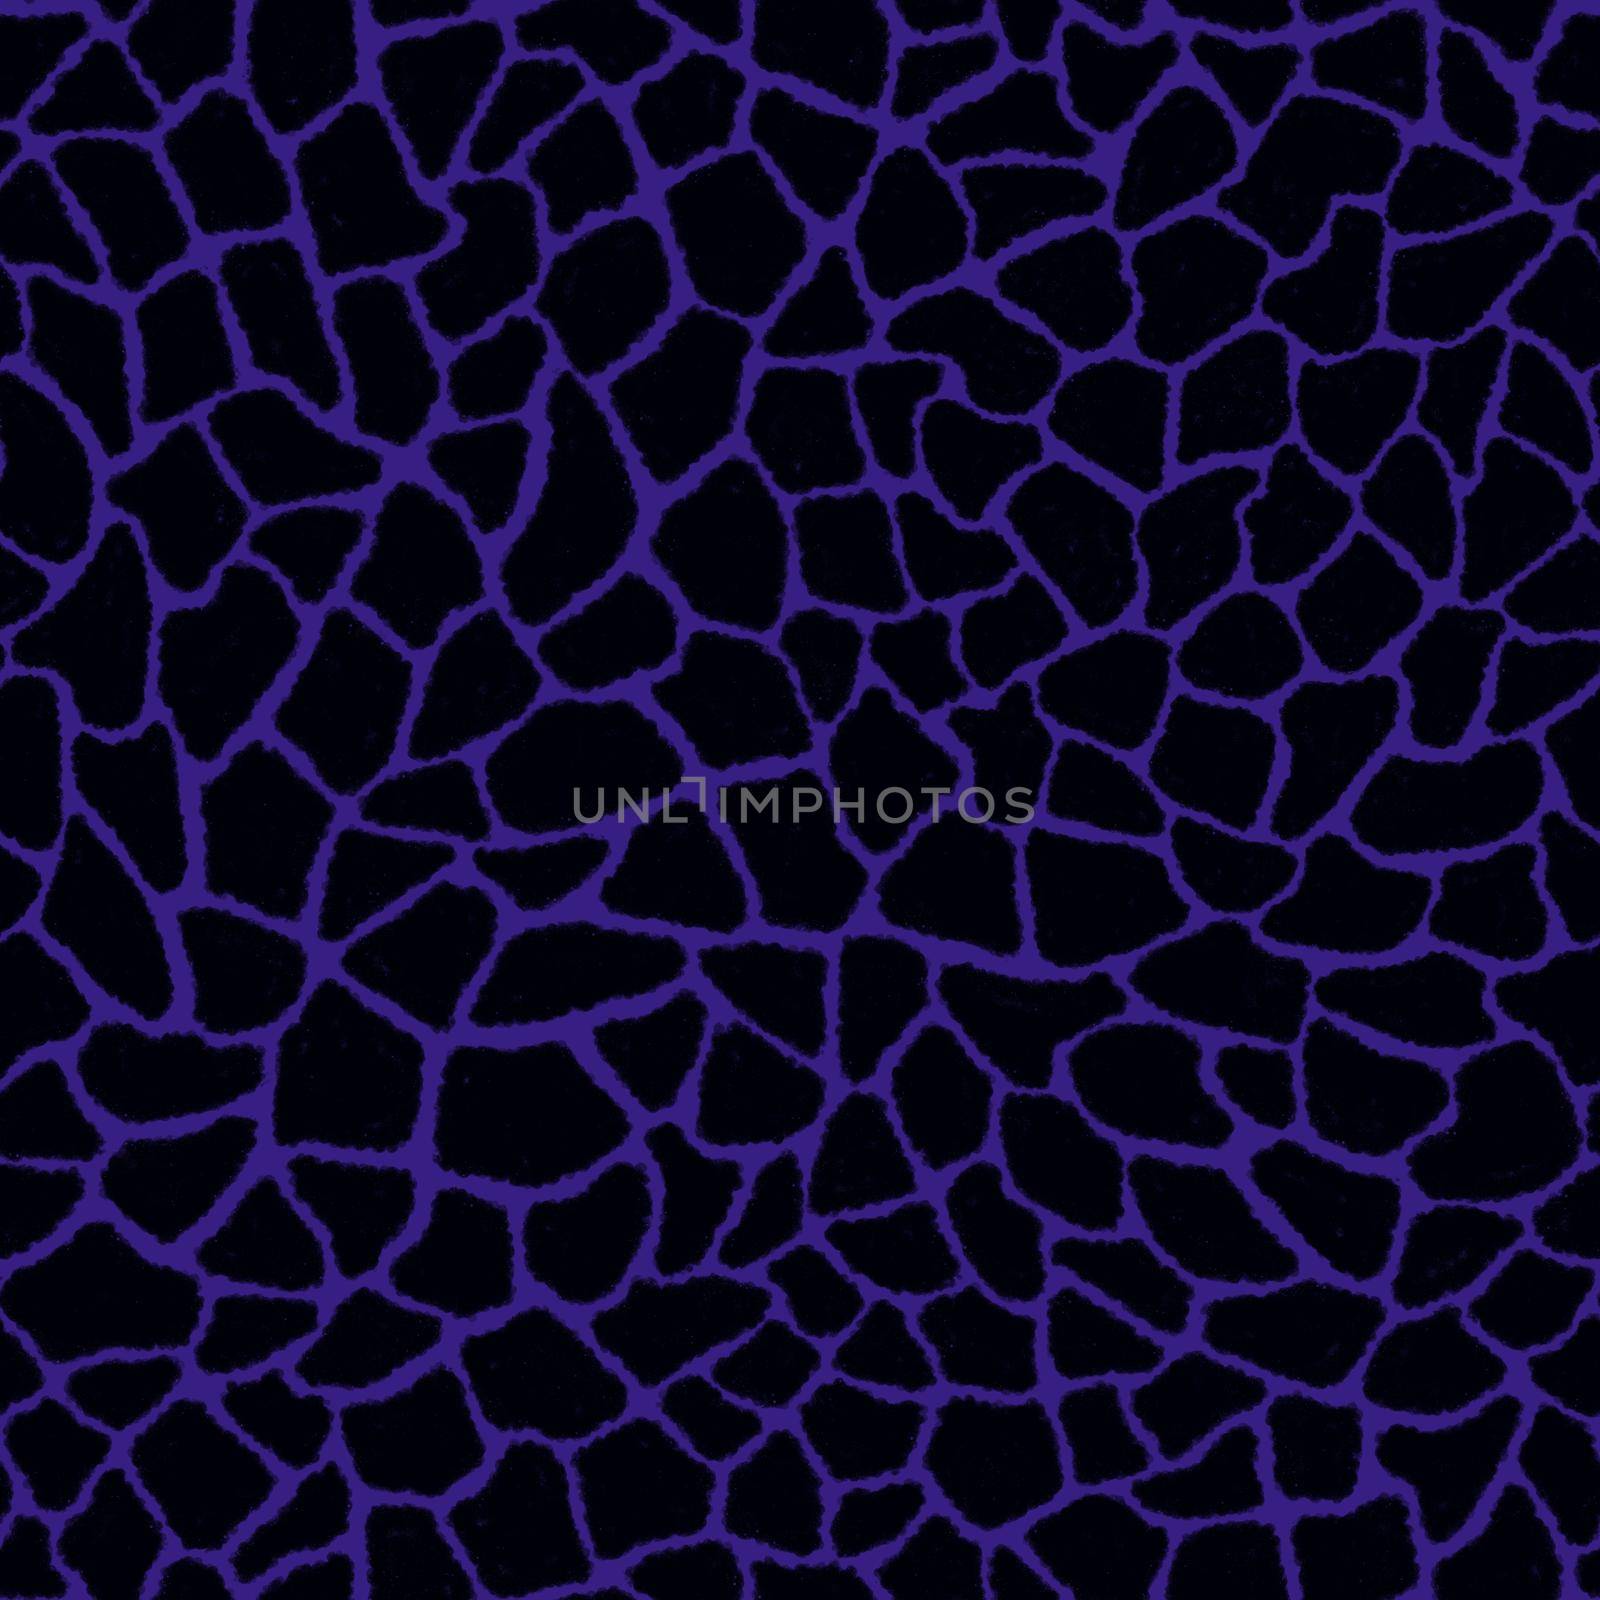 Giraffe skin color seamless pattern with fashion animal print for continuous replicate. Chaotic mosaic black pieces on blue background. Wrapping paper, funny textile fabric print,design,decor.